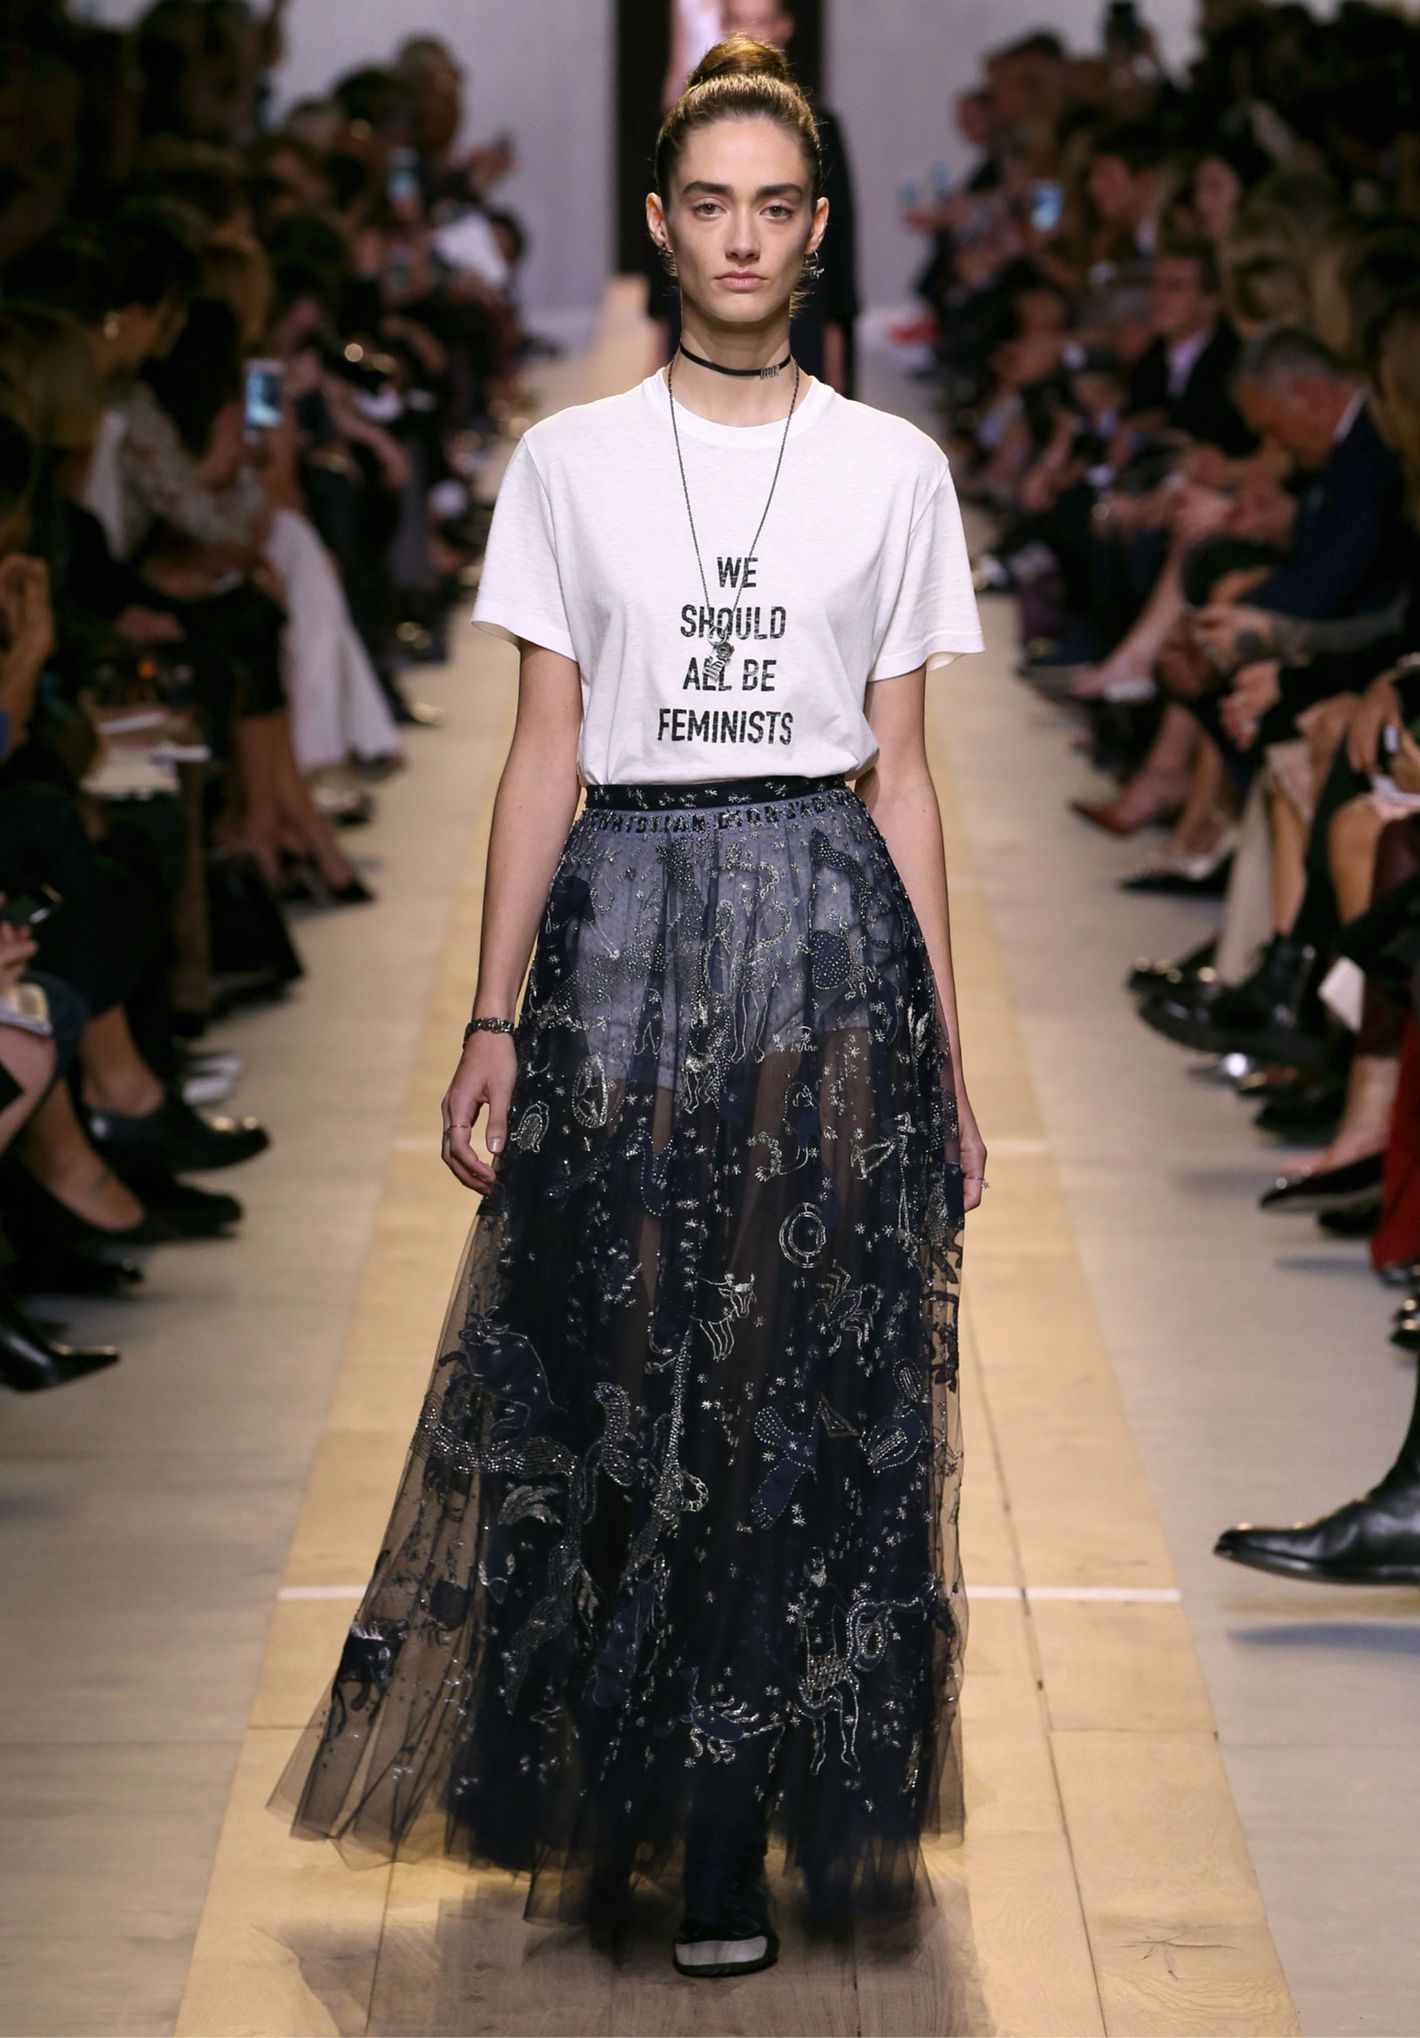 Diors First Female Designer Included A Feminist TShirt On The Runway At  Paris Fashion Week  PHOTOS